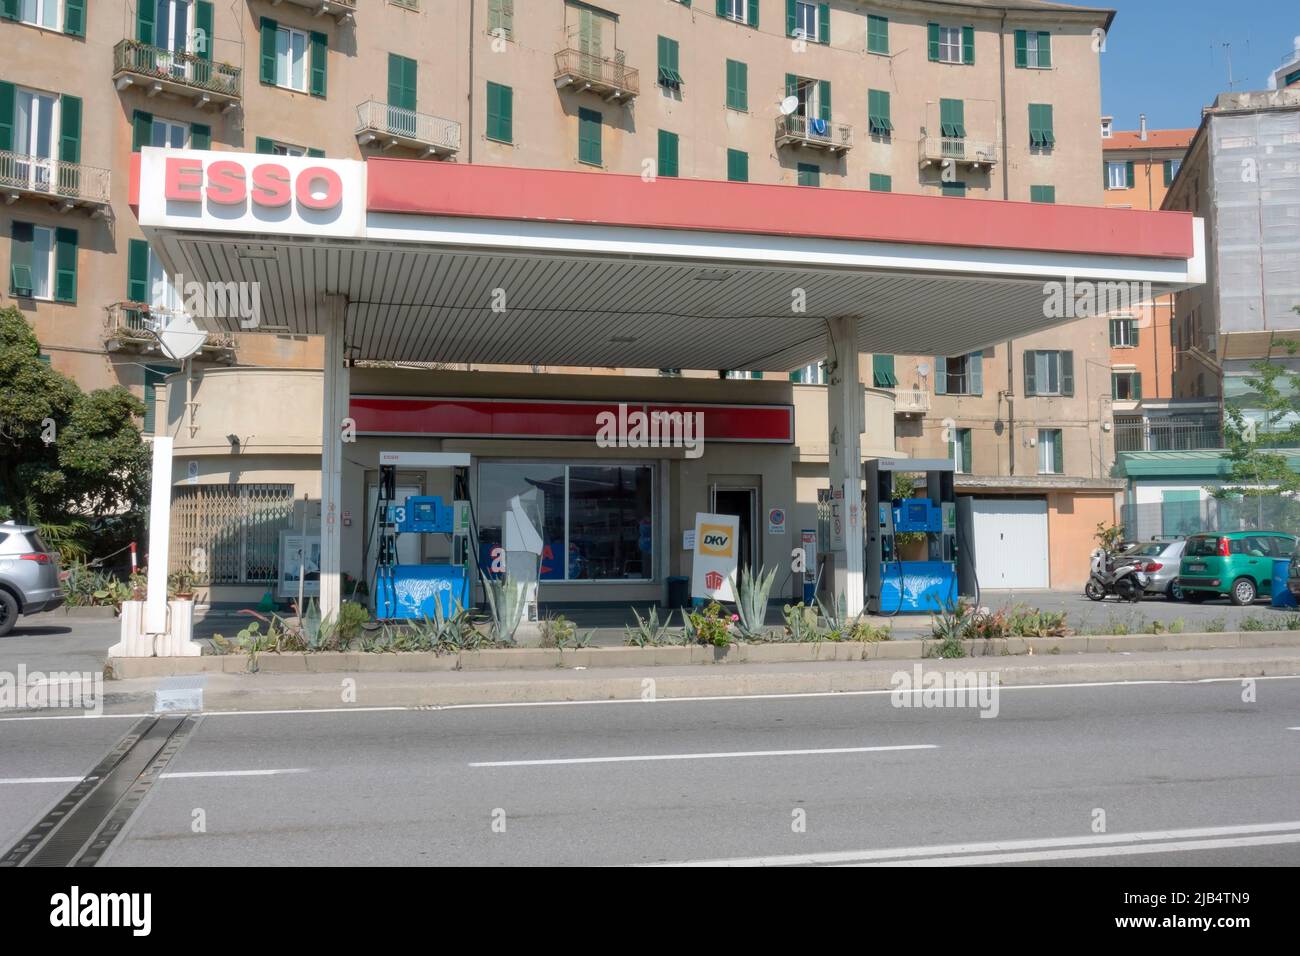 Savona, Italy - May 4, 2022: Esso gas station.. Esso is a trading name for ExxonMobil. Stock Photo